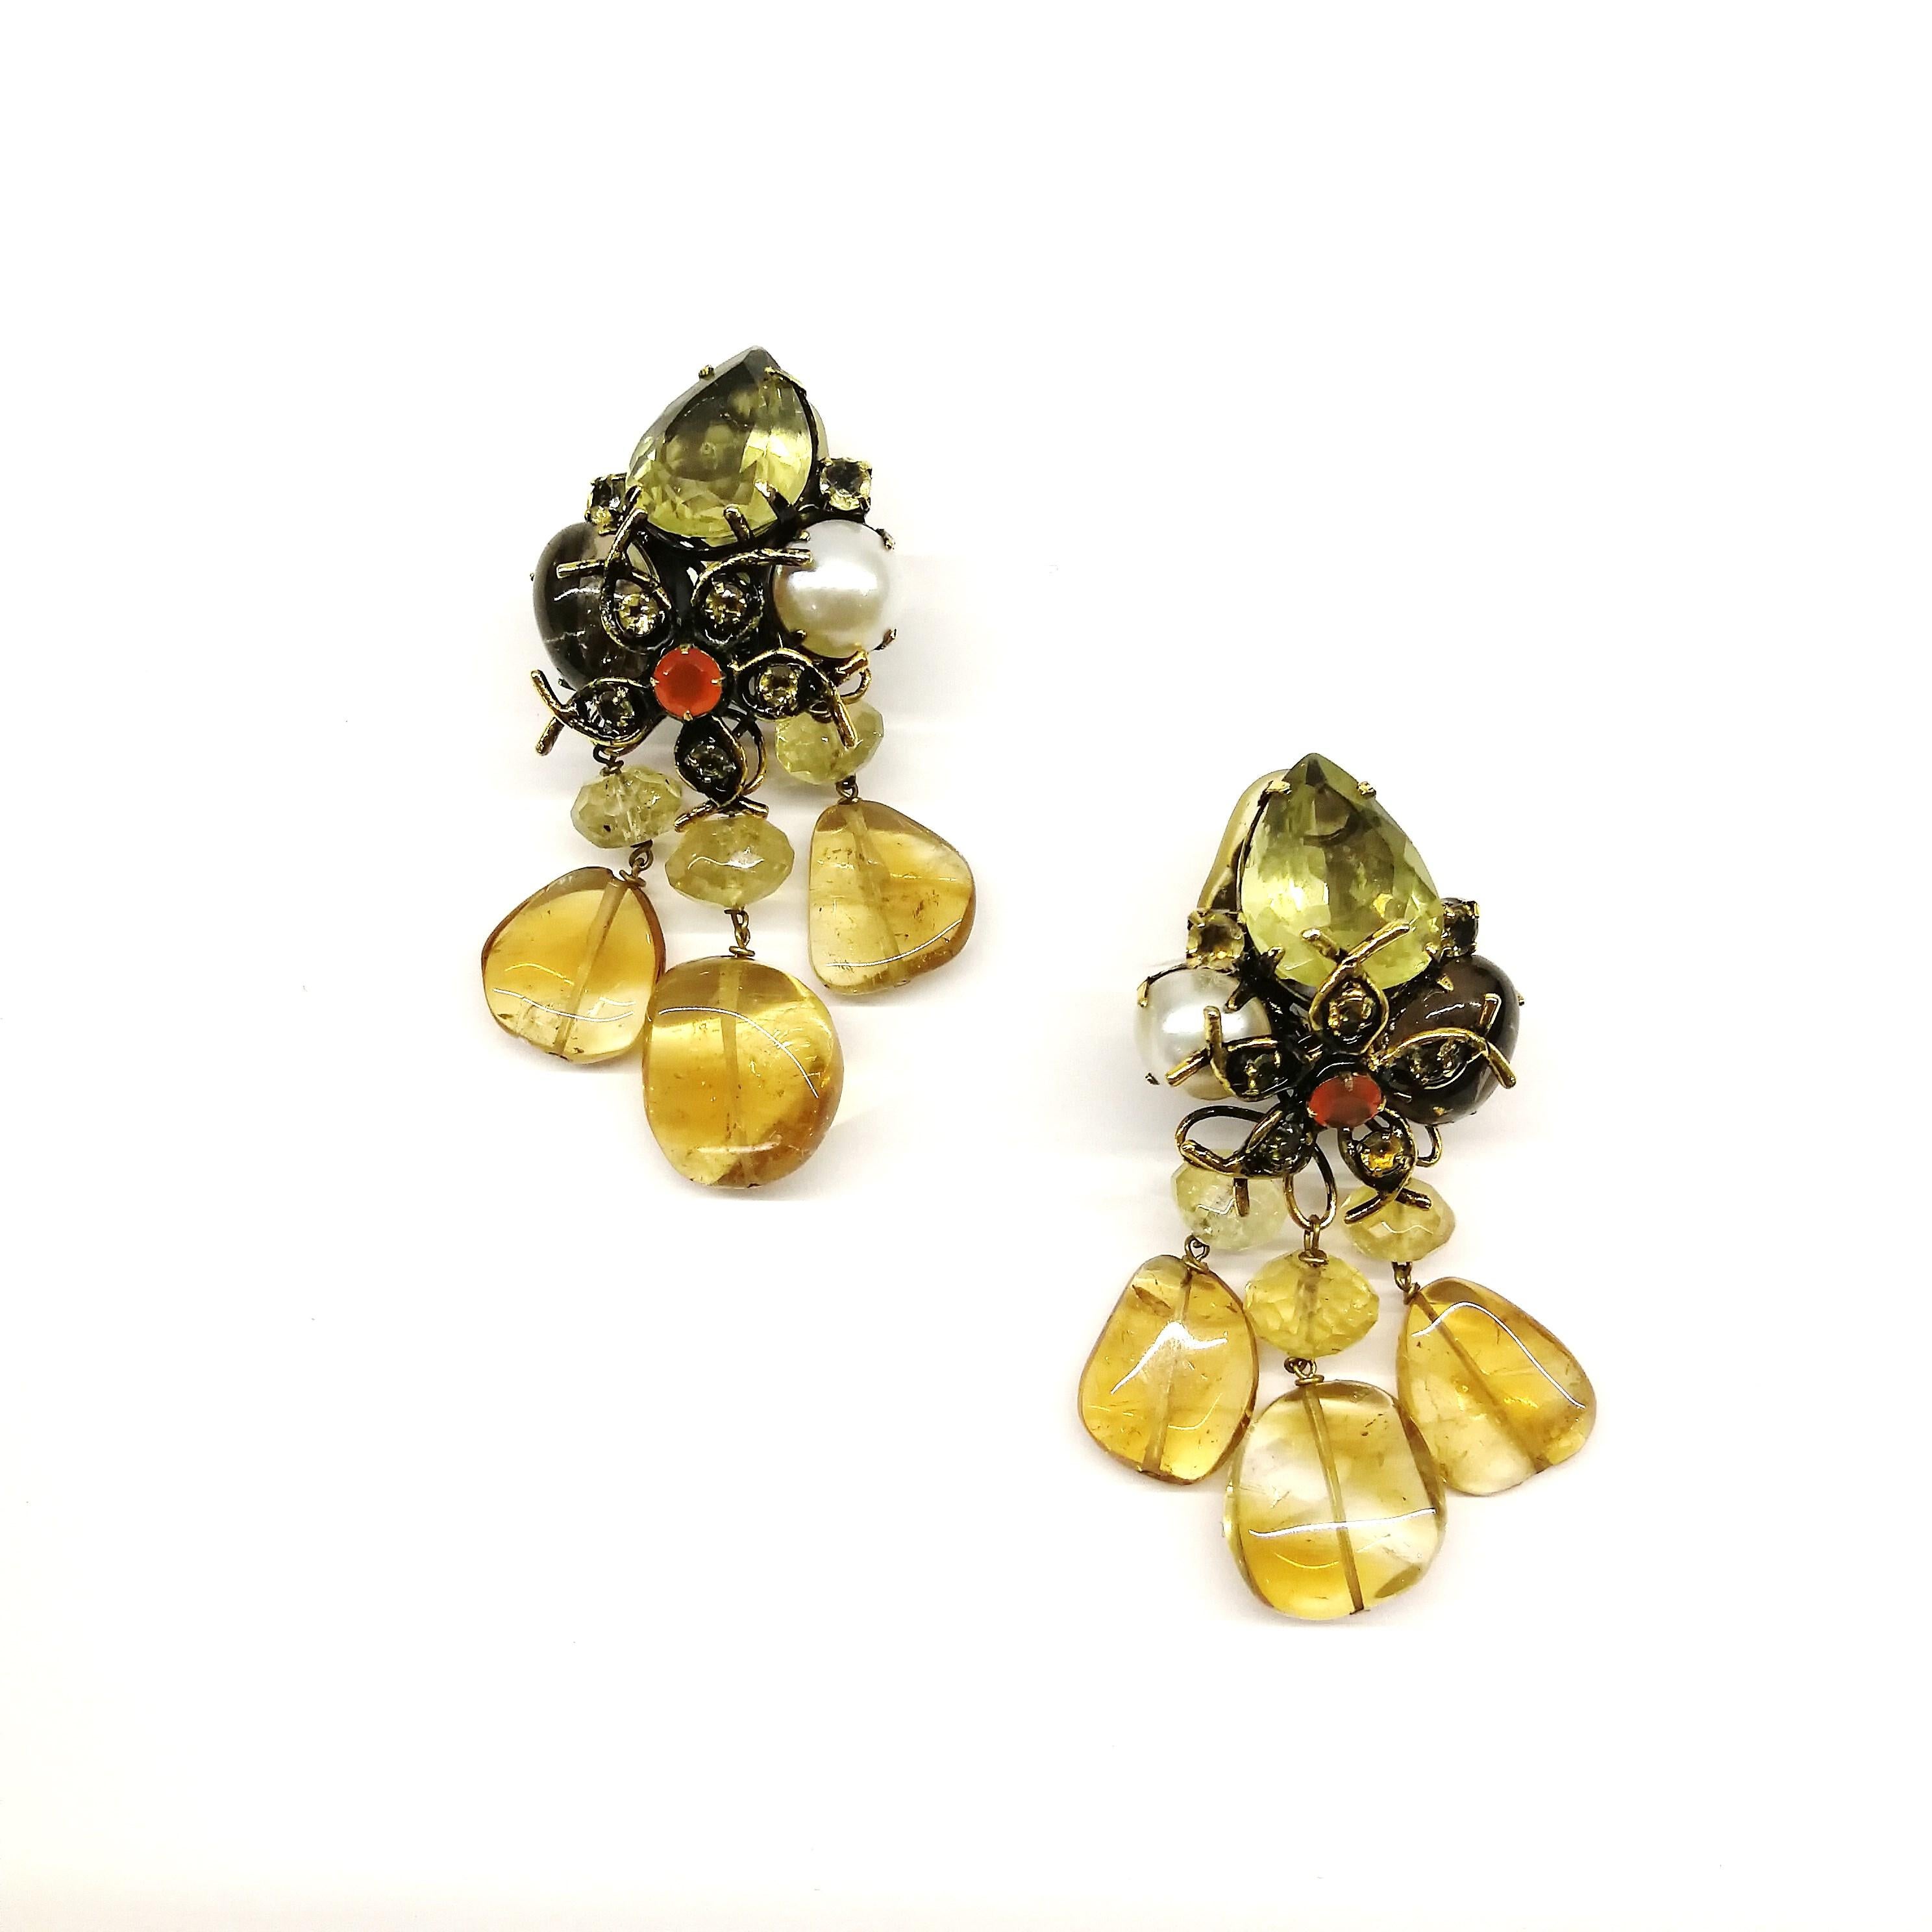 A gentle combination of colour mark these drop earrings from Iradj Moini in the 1990s. A soft colourway of citrine, cornelian, smokey quartz are highlighted by a cabuchon pearl, adding a richness to the combination. Iradj Moini earrings are always